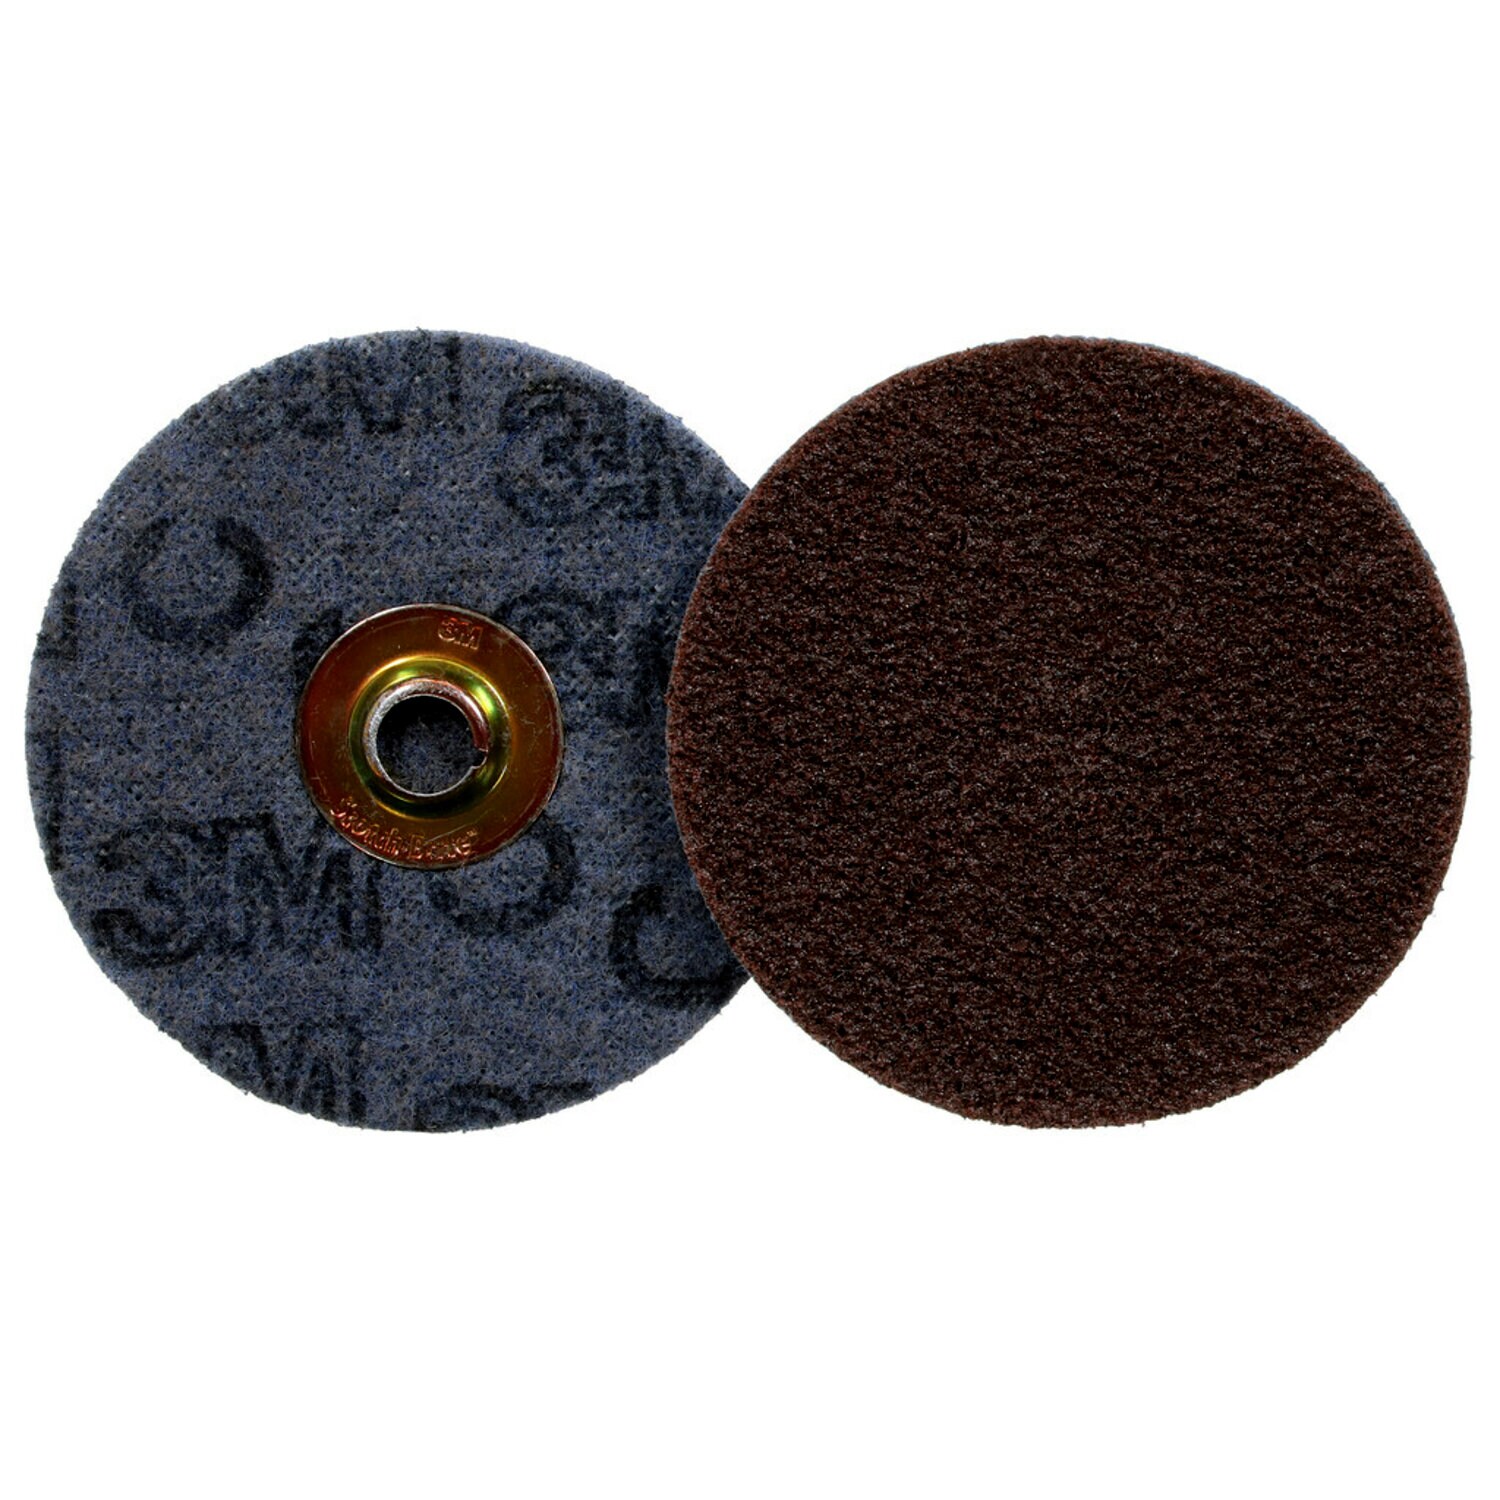 https://www.e-aircraftsupply.com/ItemImages/26/2262003E_a-scotch-brite-se-surface-conditioning-tn-quick-change-disc-se-dn-a-o-coarse-4-1-2-in.jpg